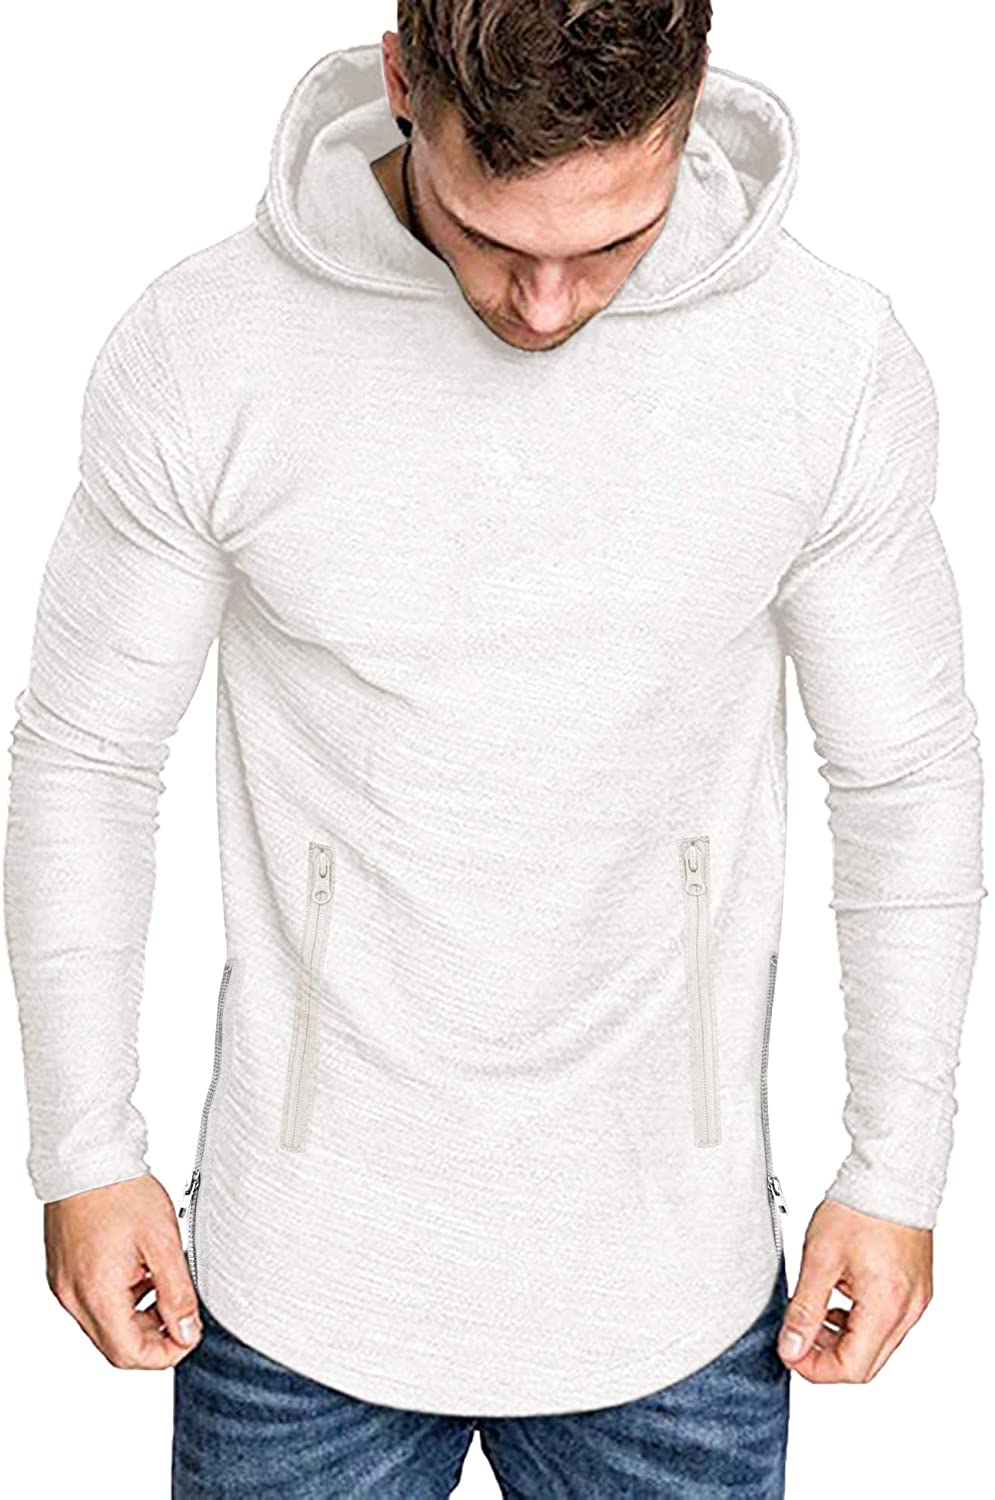 COOFANDY Men's Fashion Workout Hoodie Muscle Fit Cotton Blend Gym ...